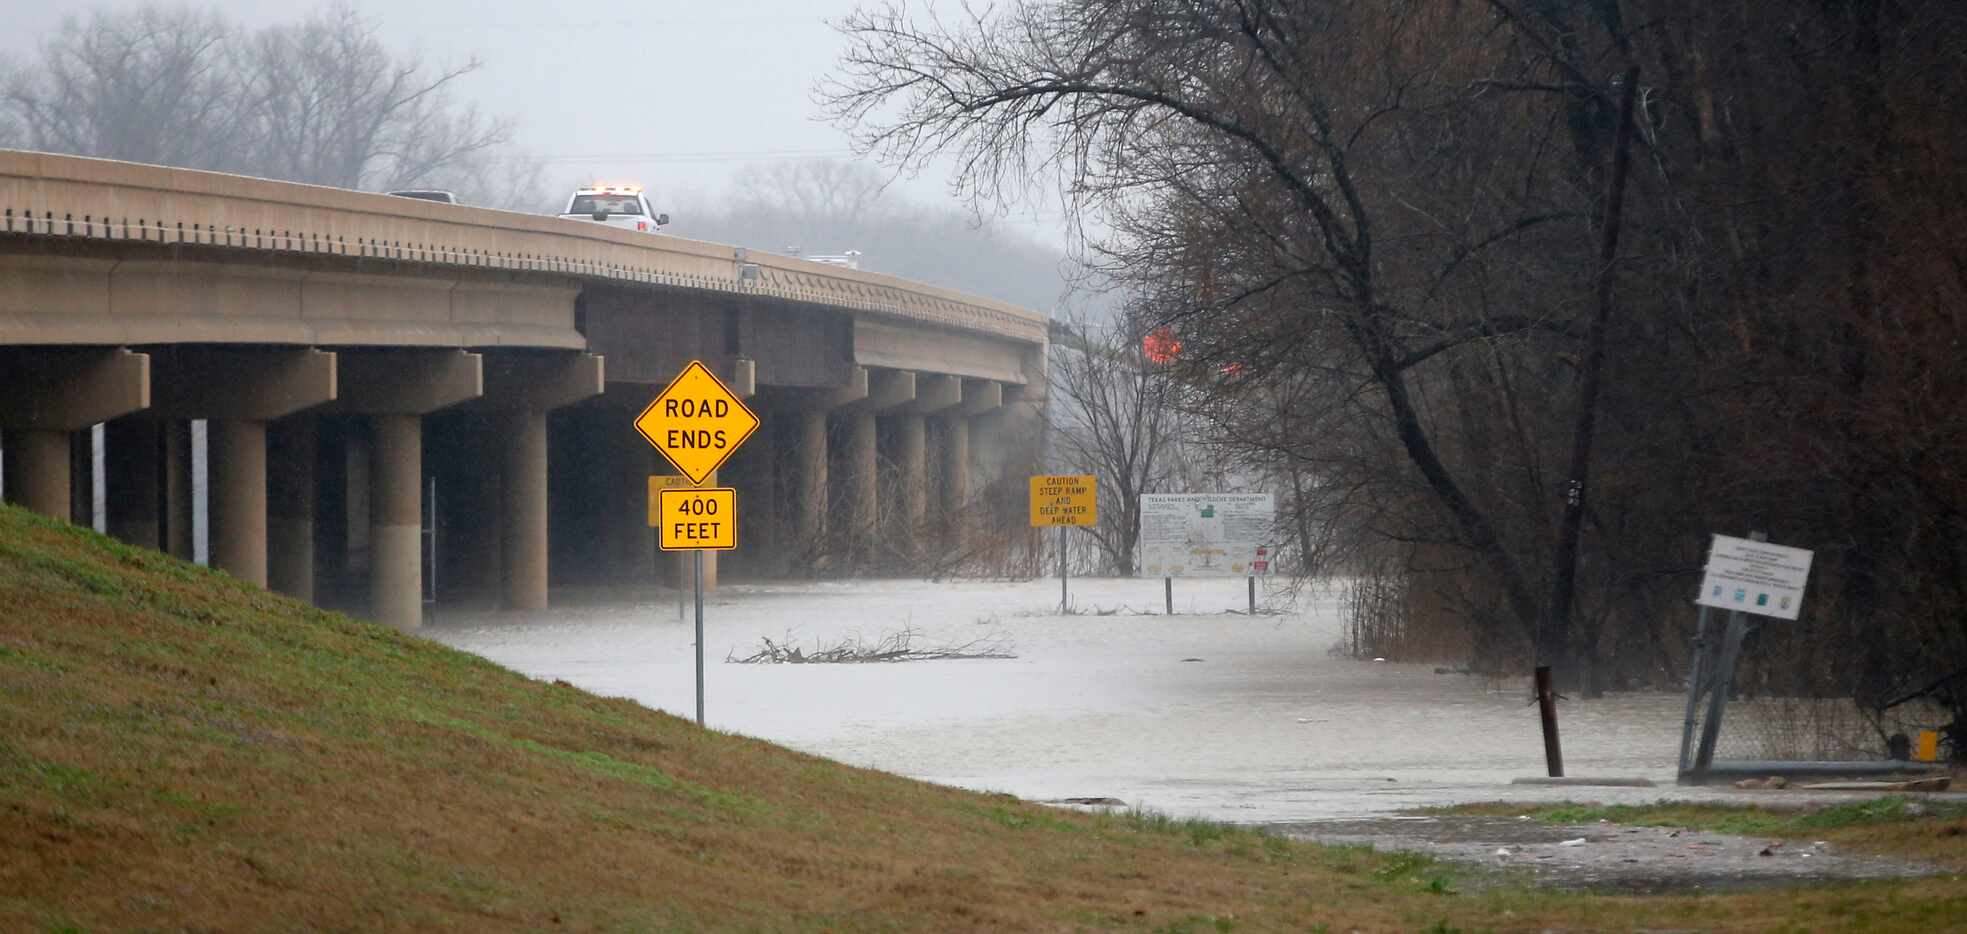 Dallas Fire-Rescue teams respond to a report that a car and person were swept away Wednesday.